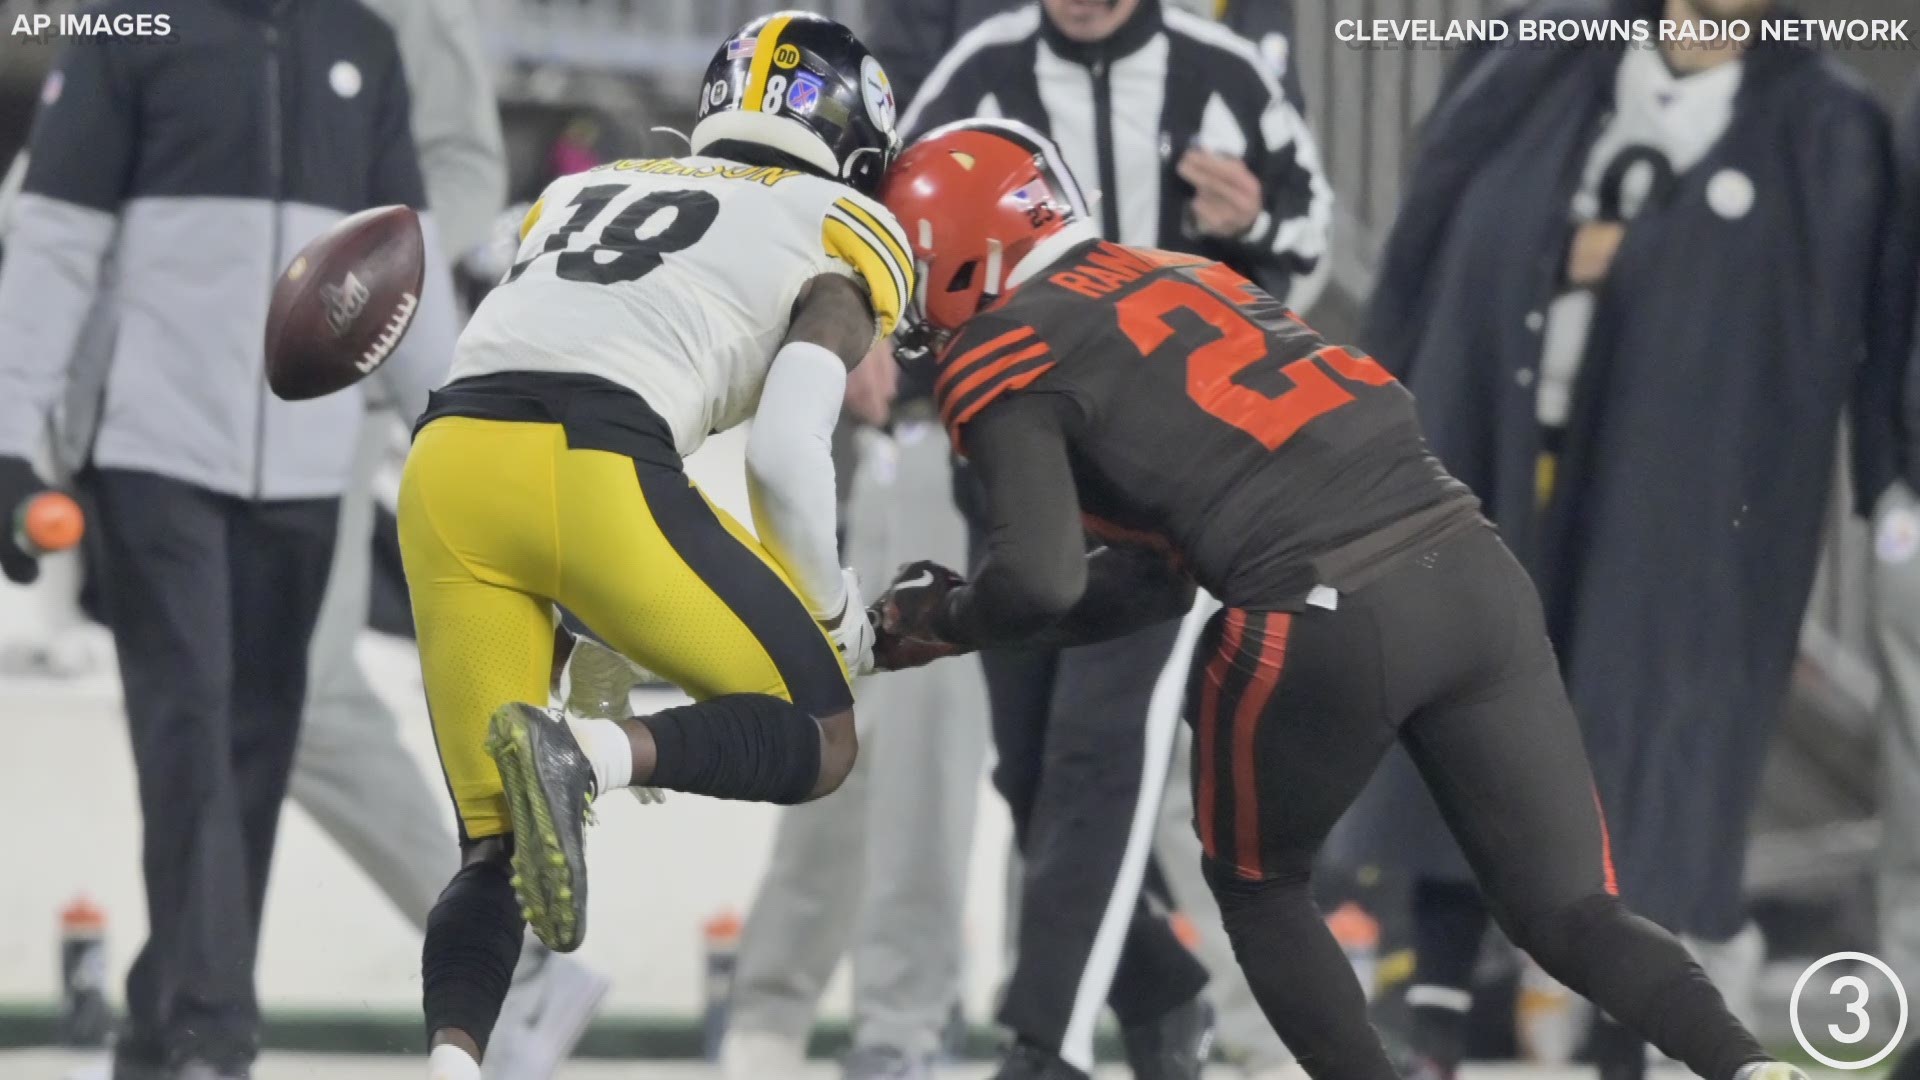 Cleveland Browns safety Damarious Randall was ejected from the team's game vs. the Pittsburgh Steelers for a helmet-to-helmet hit in the third quarter.